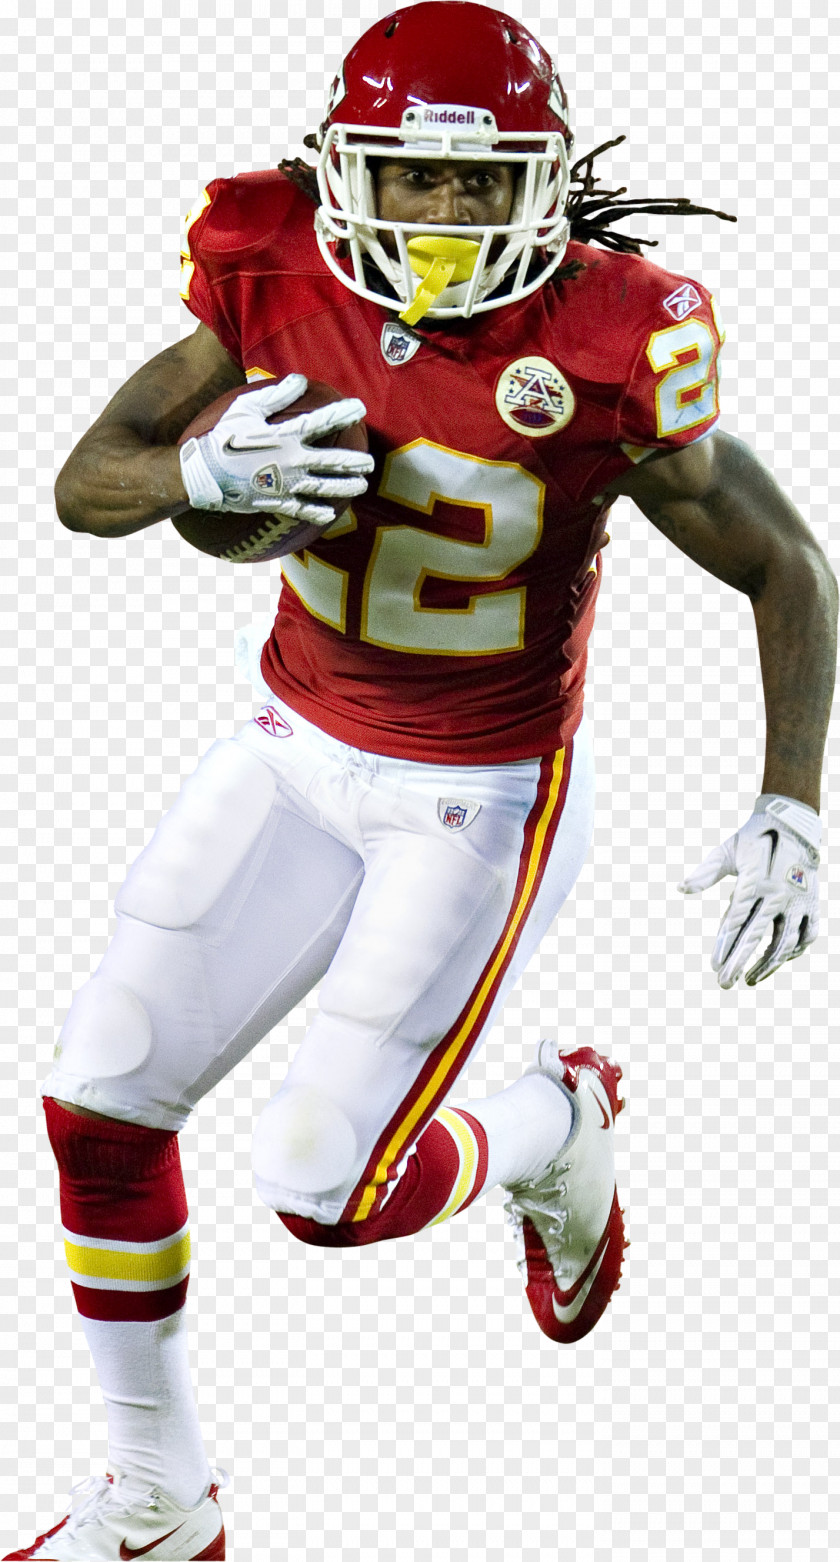 American Football Player Kansas City Chiefs Helmet Los Angeles Chargers Denver Broncos PNG